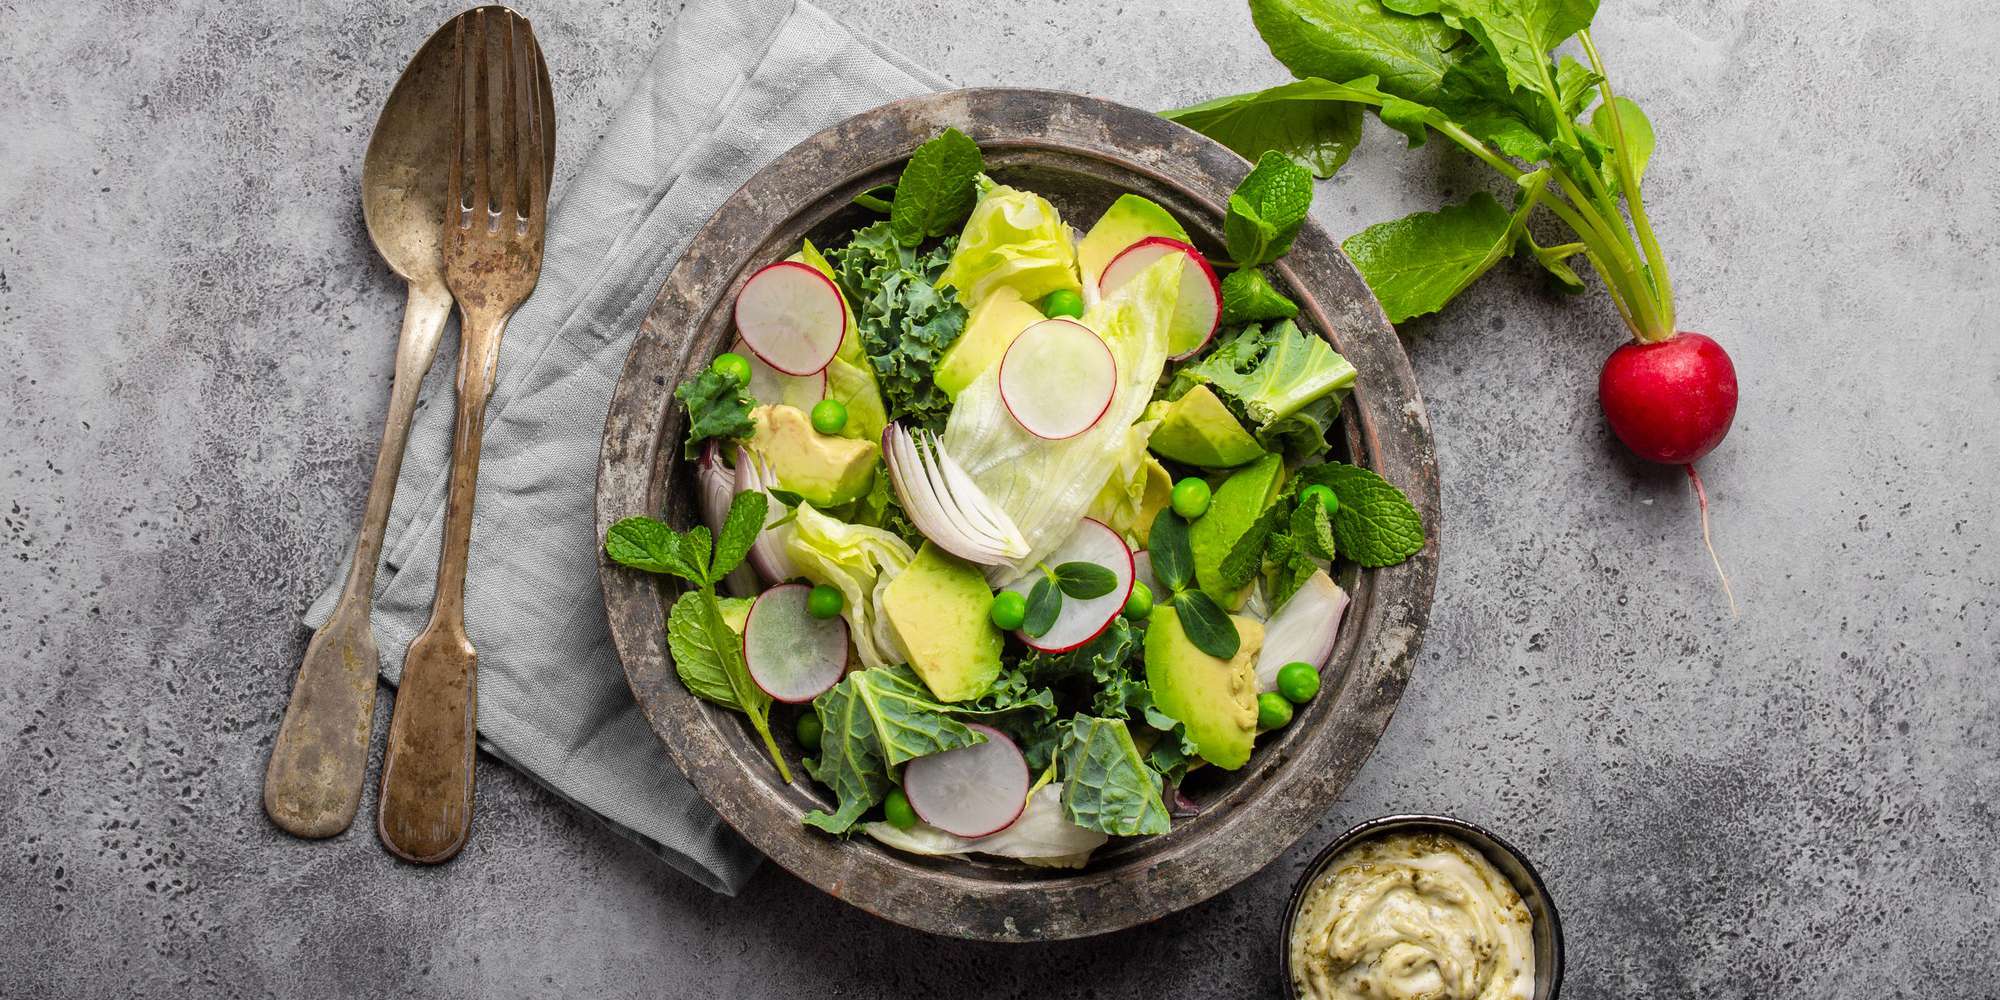 Green & Glowing Salad with Creamy Ginger Dressing